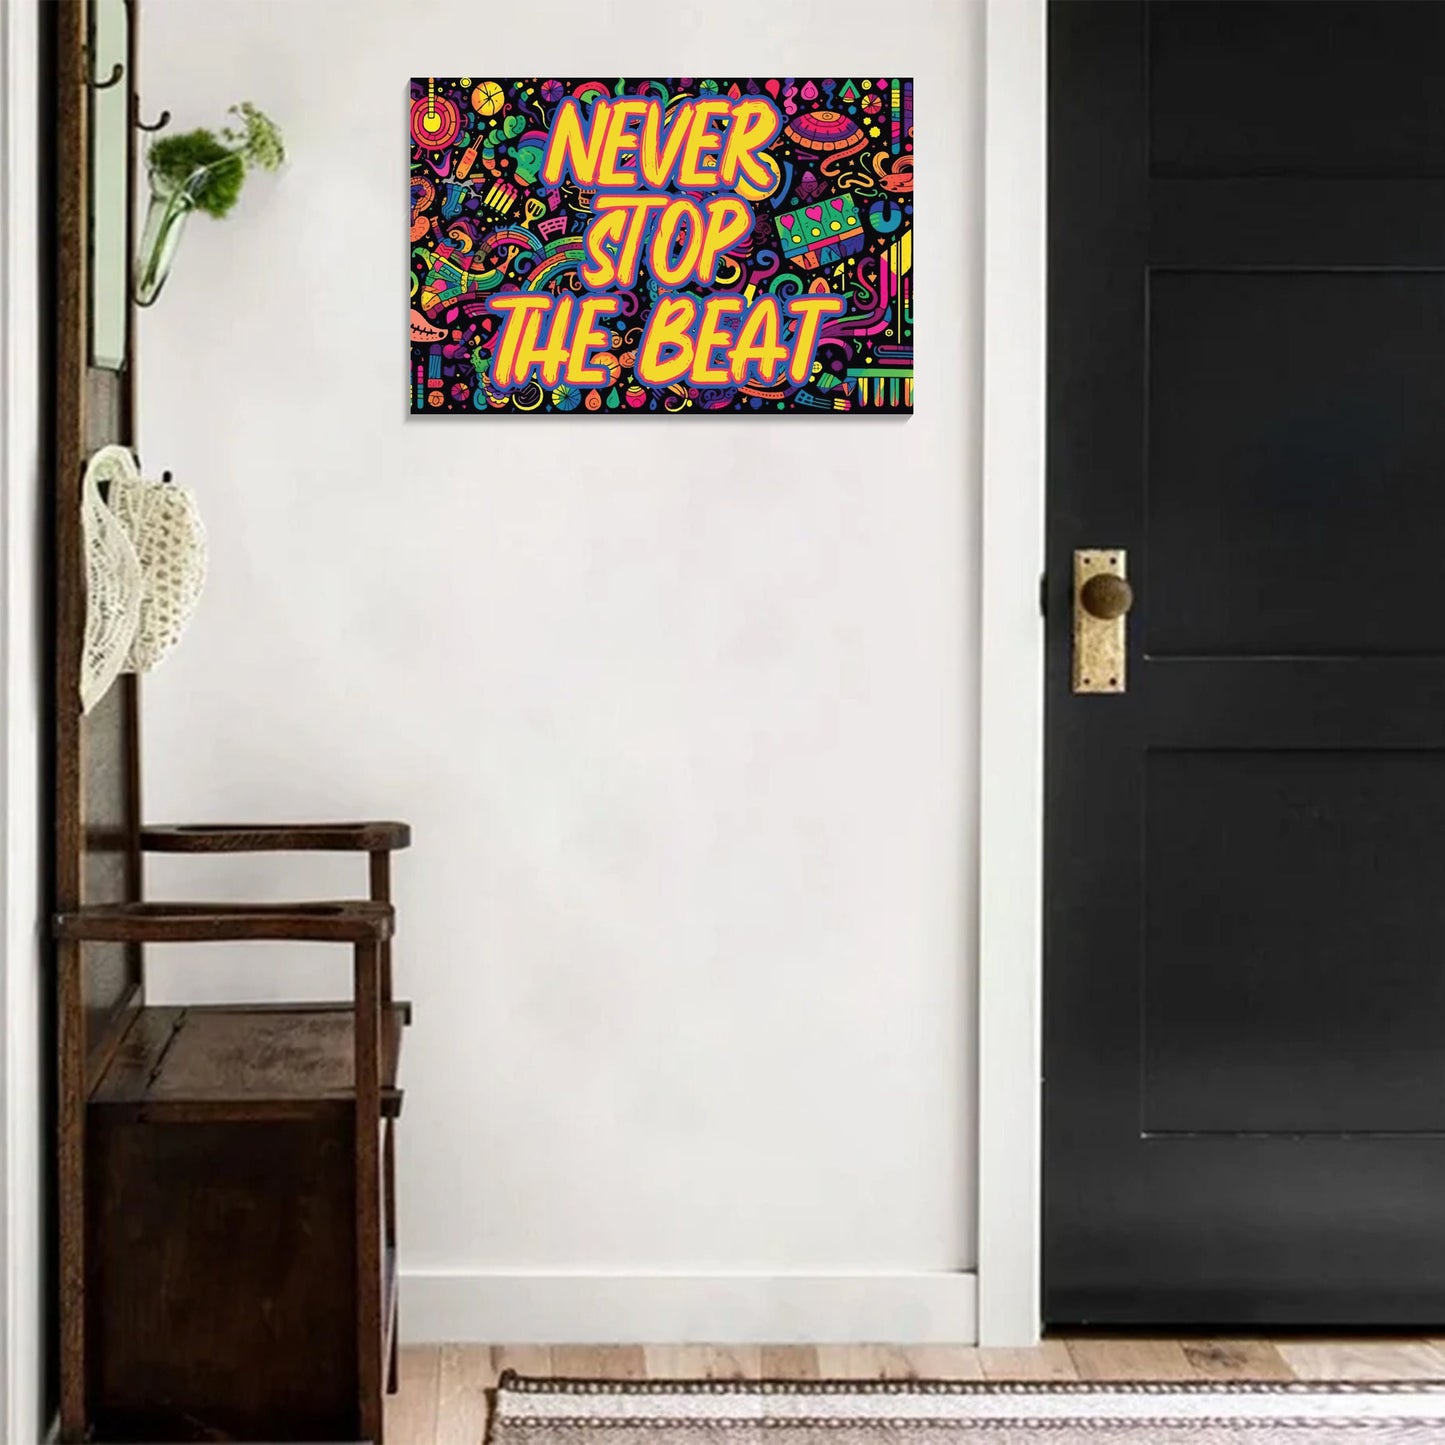 Wooden "Never Stop The Beat" Decor Sign For Indoor Display - 7.5In X 5In - Fun And Funky Patterned Design Fun Door Sign